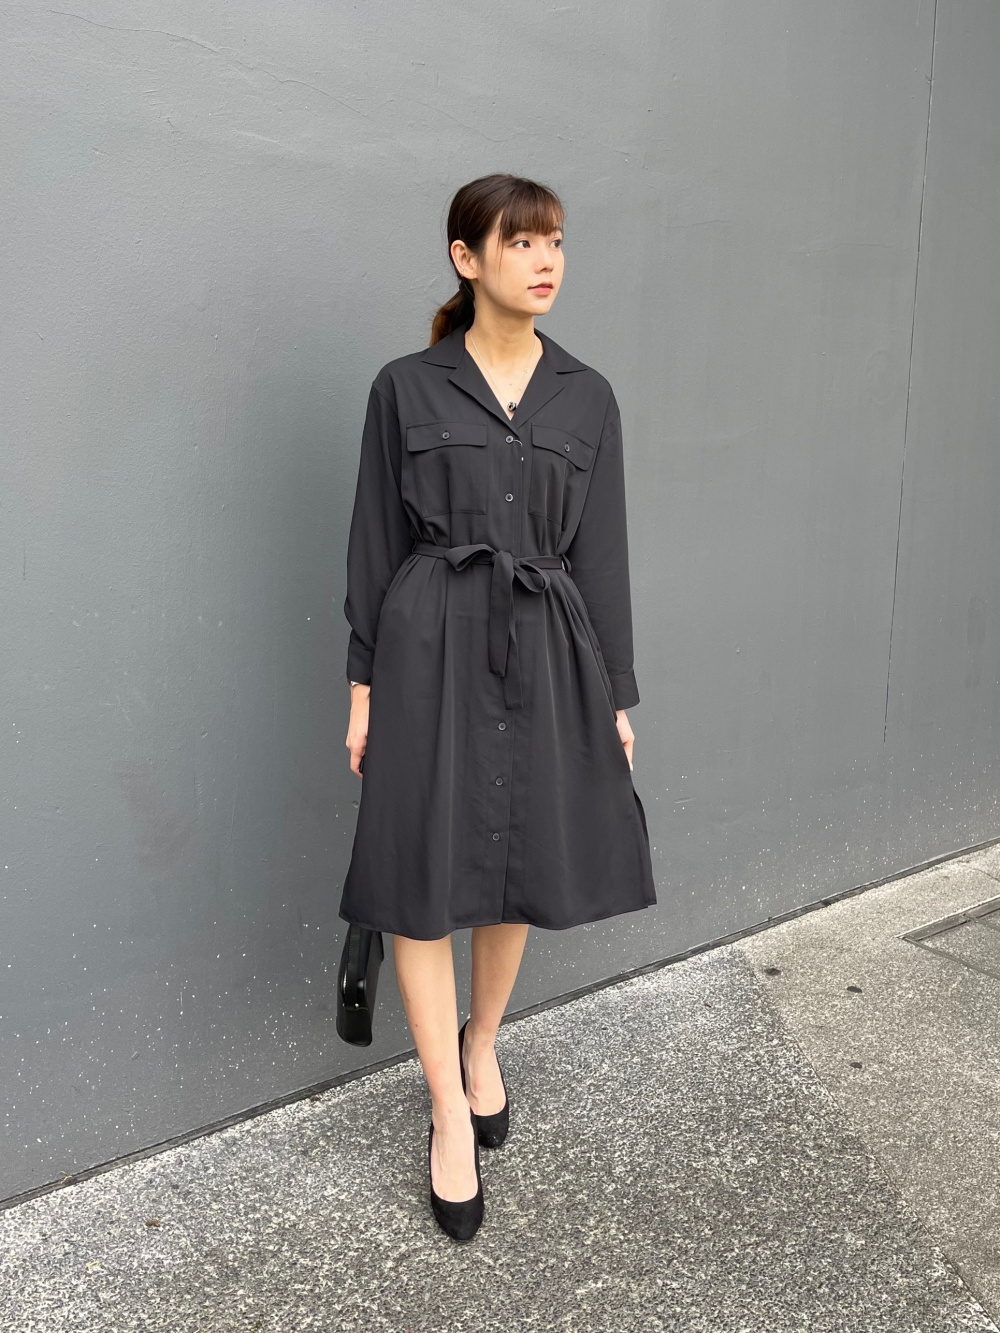 Check styling ideas for「UV Protection Long-Sleeve Shirt Dress」